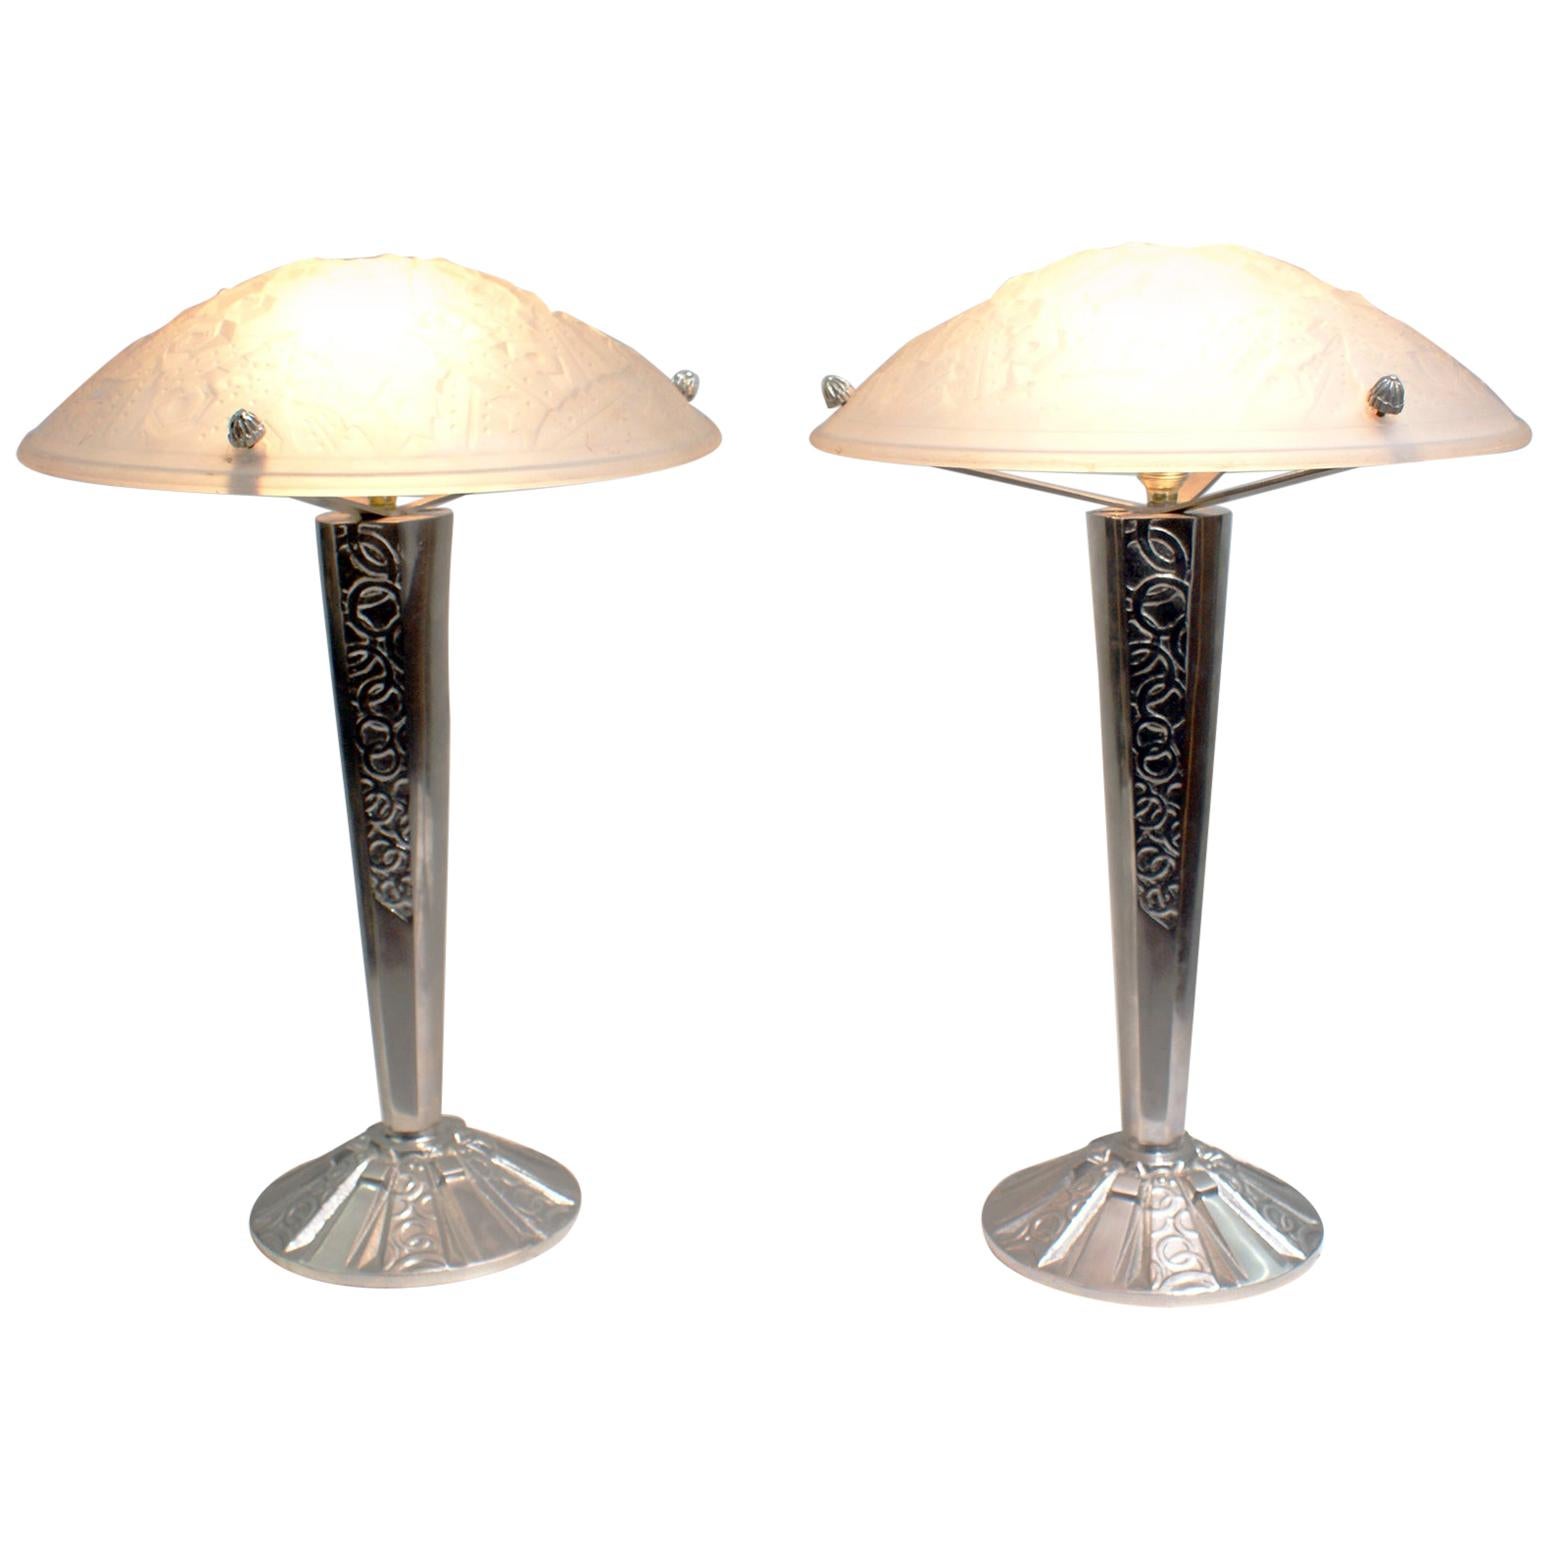 Pair of French Art Deco Table Lamp Signed “Muller Frères Luneville”